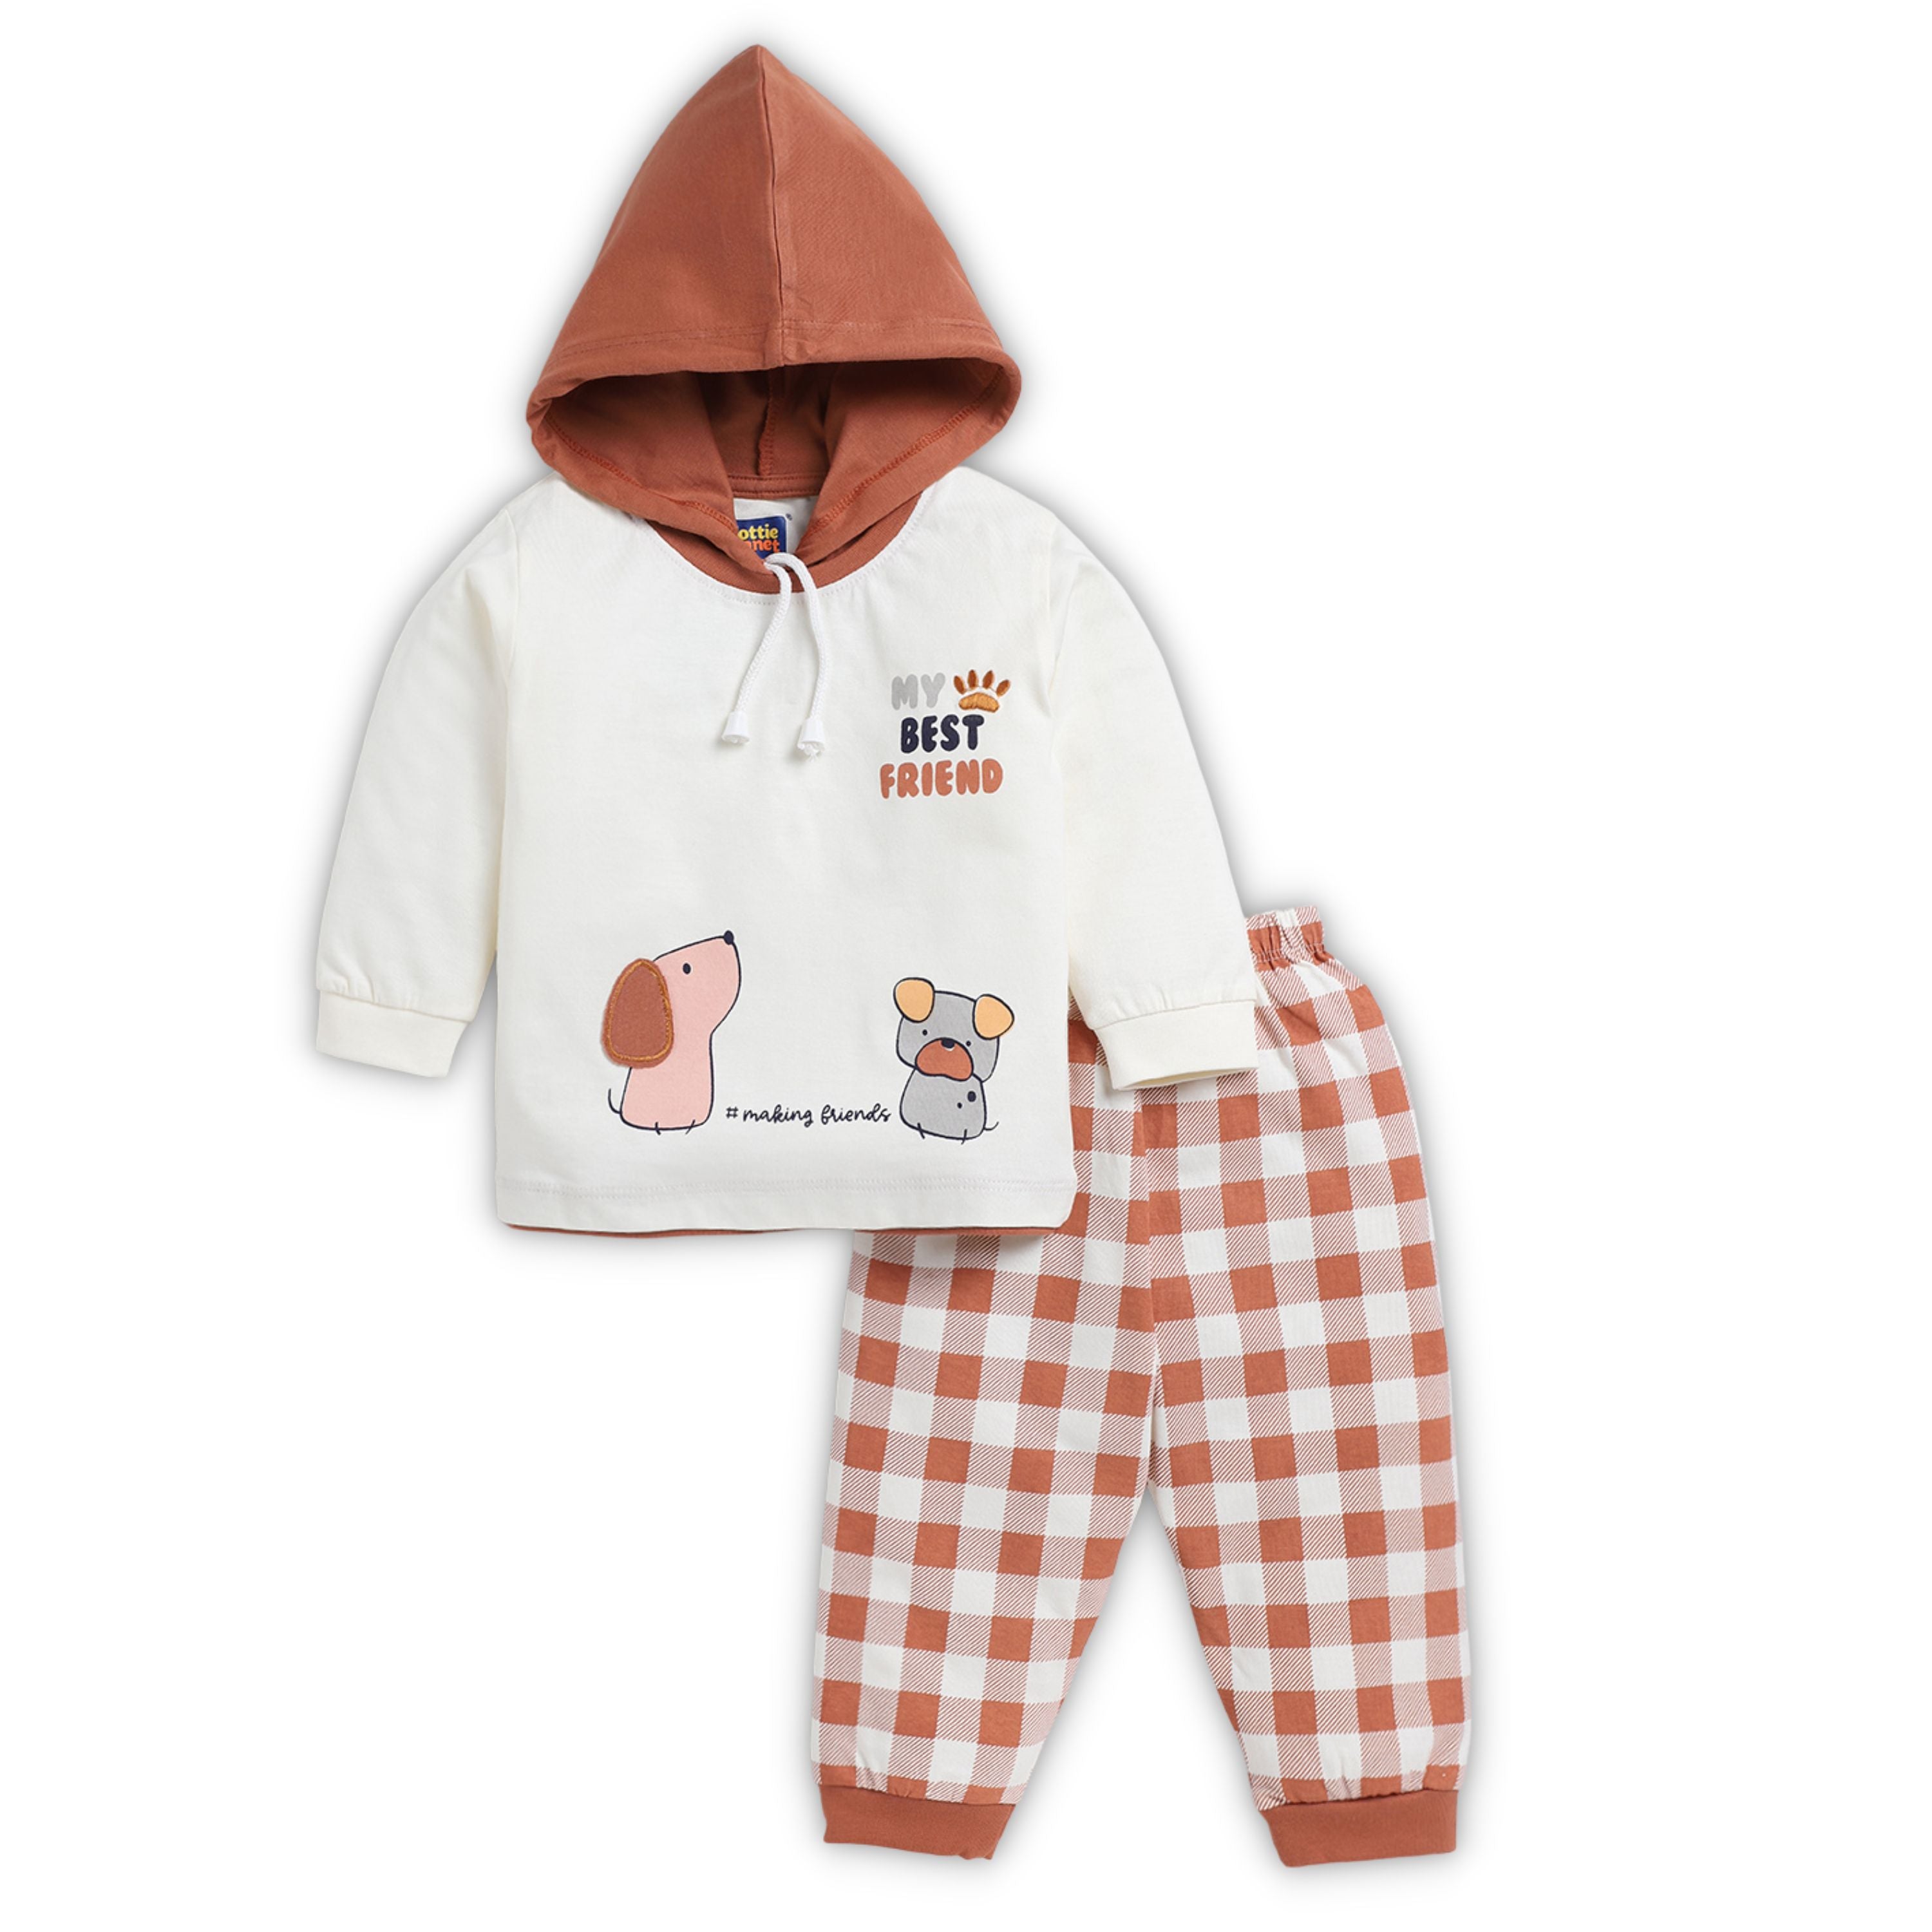 HOODED CLOTHING SET FOR BOY - D.BROWN